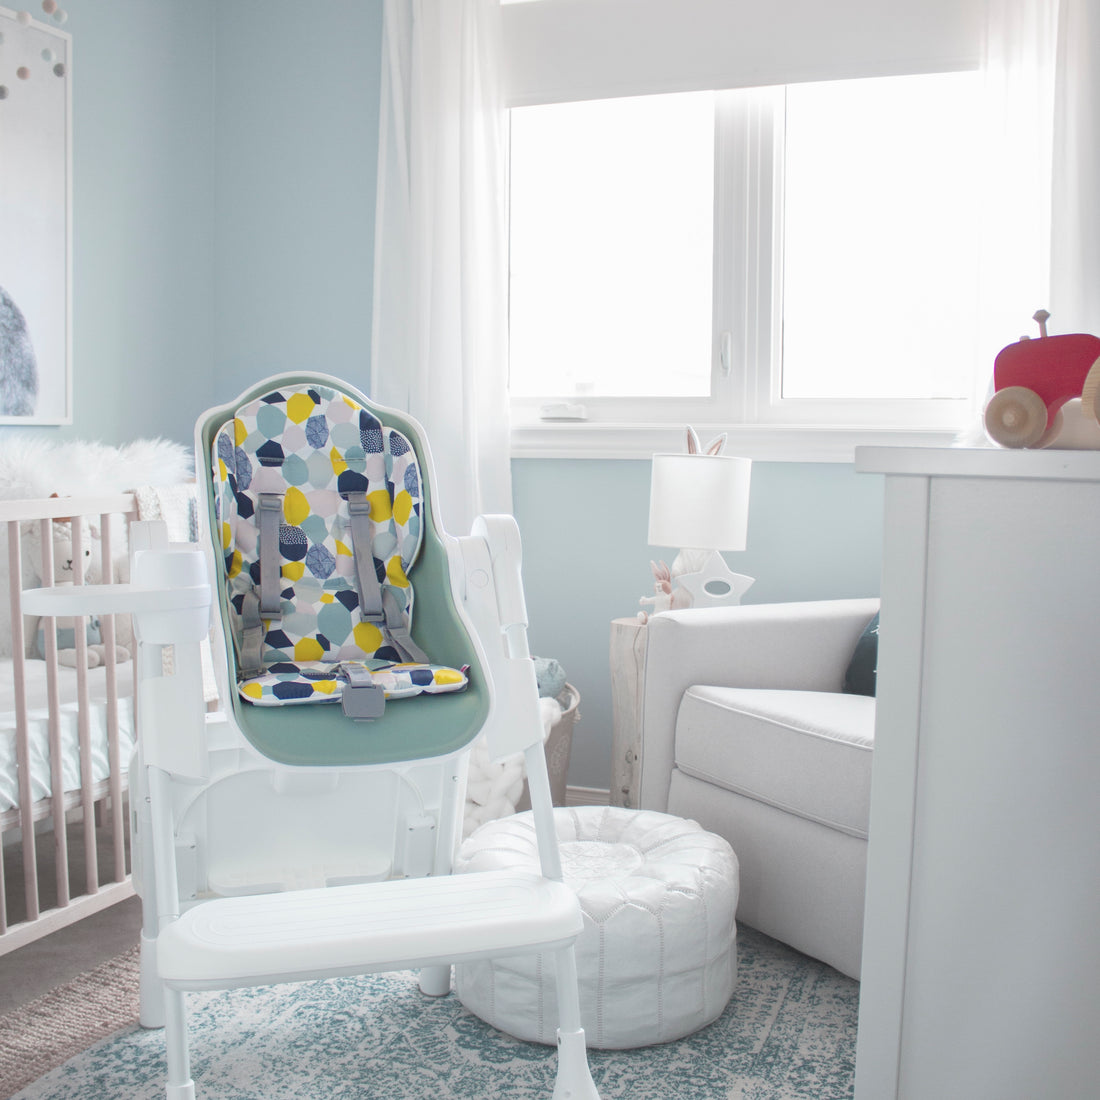 The Oribel Cocoon modern high chair in Pistachio Merengue. A perfect fit for modern nurseries.